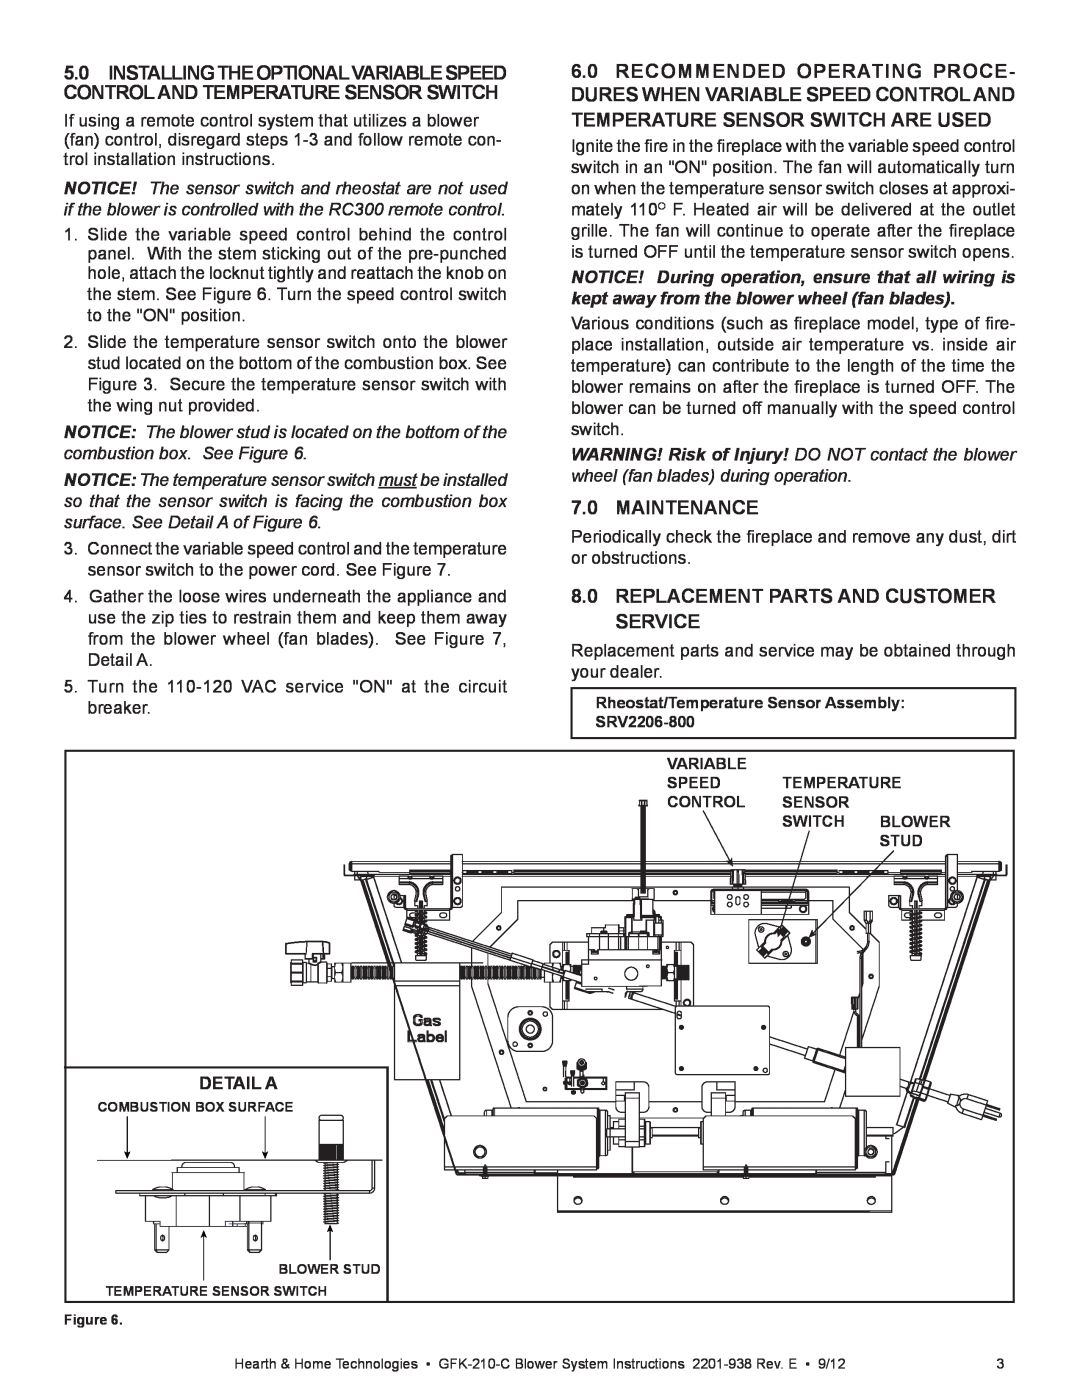 Hearth and Home Technologies GFK-210-C installation manual Maintenance, Replacement Parts And Customer Service 